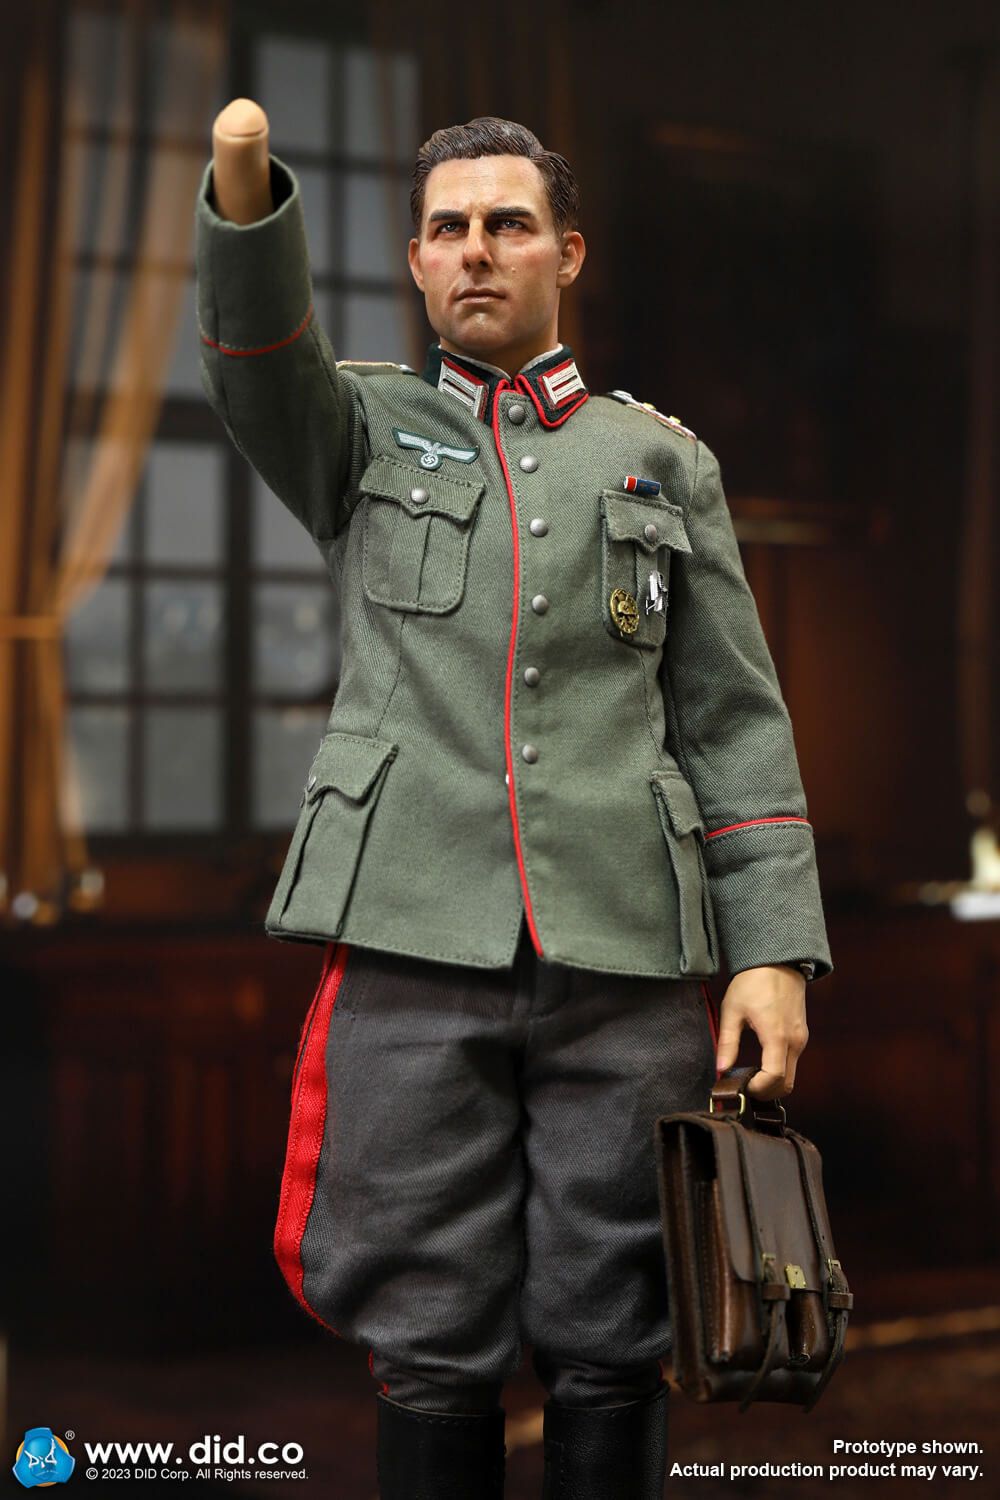 OperationValkyrie - NEW PRODUCT: DiD: D80162 Oberst I.G. Claus Von Stauffenberg  OPERATION VALKYRIE 19281